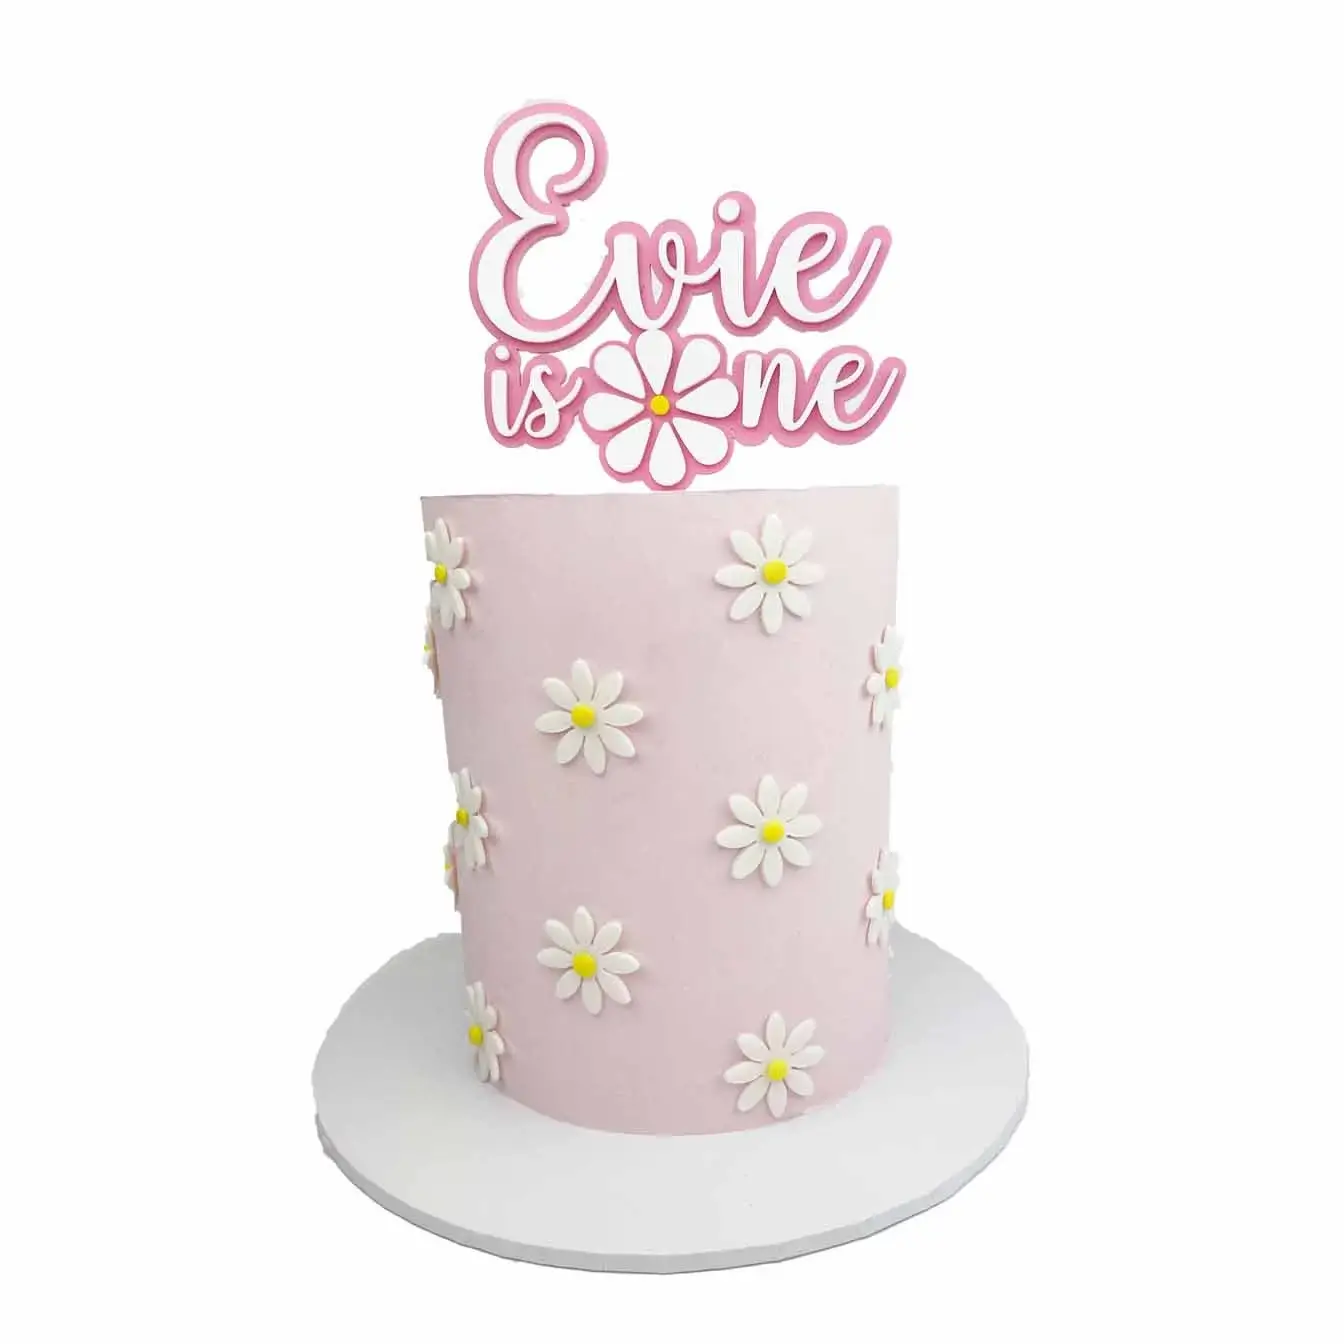 Daisy Delight Celebration Cake - A pink cake with white and yellow daisies and a custom cake topper, a charming centerpiece for celebrations filled with the freshness of spring.